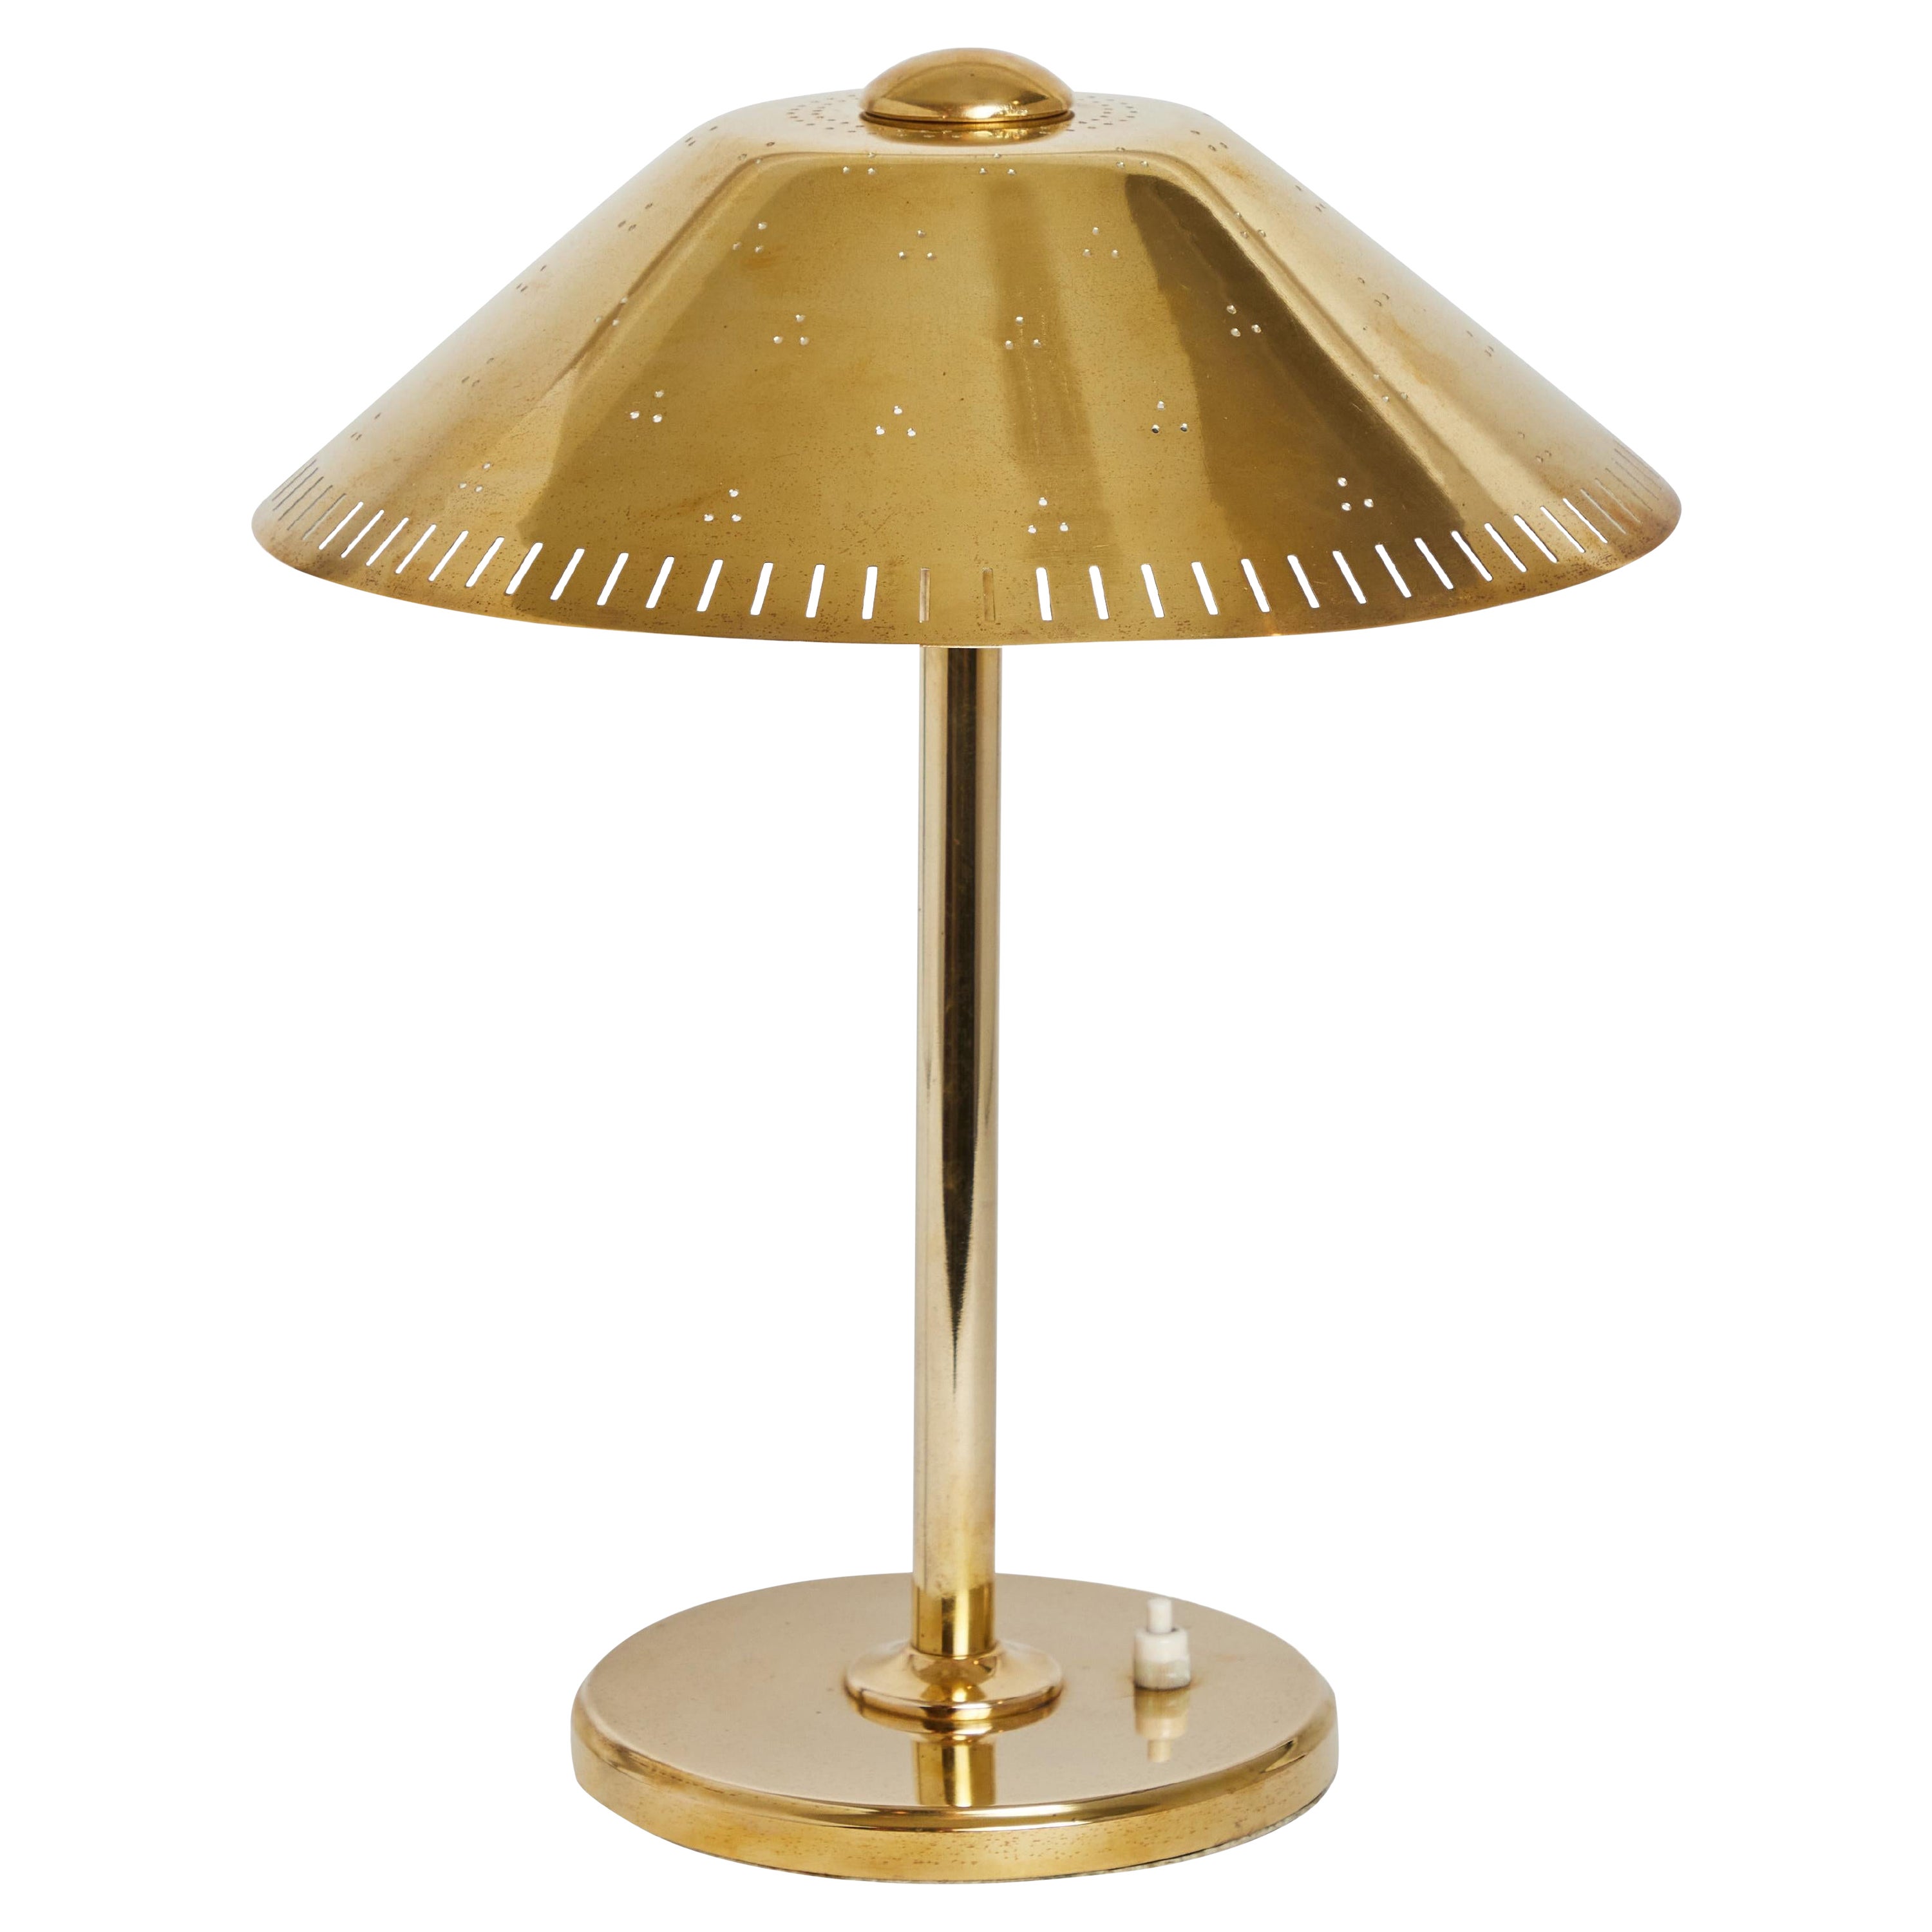 1950s Finnish Perforated Brass Table Lamp Attributed to Paavo Tynell